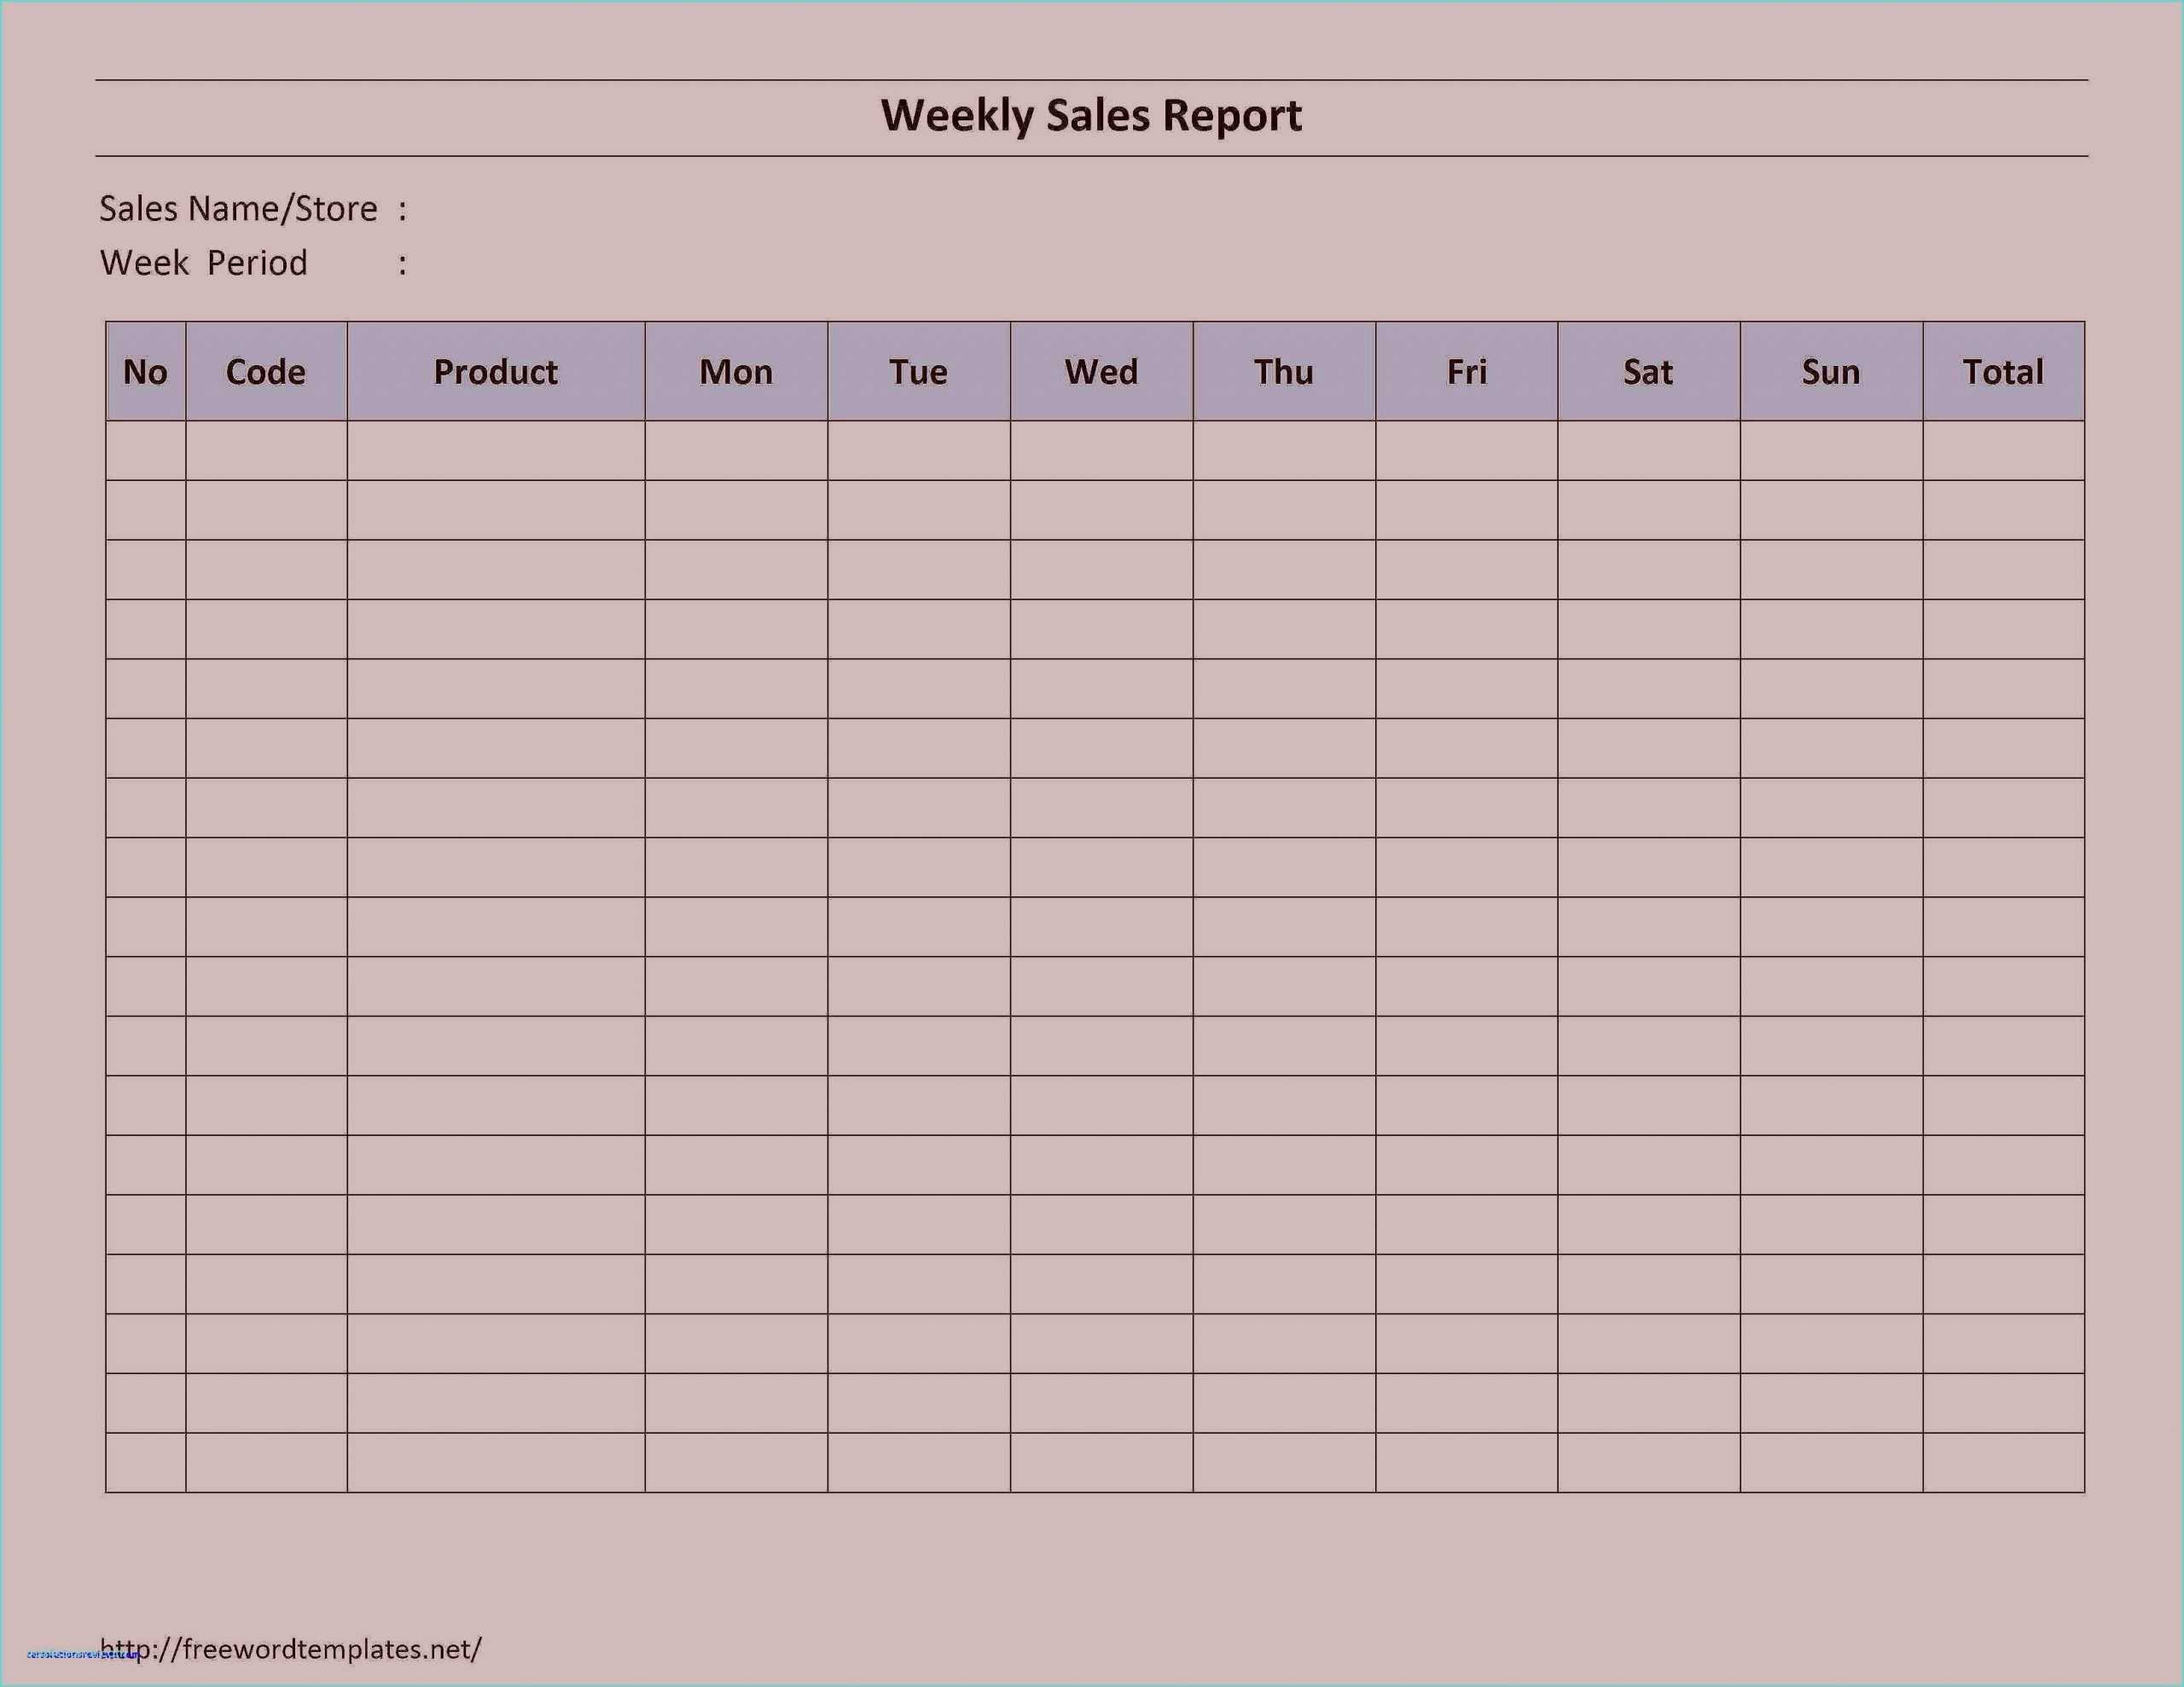 Spreadsheet Report And Weekly Sales Template Activity In Sales Activity Report Template Excel